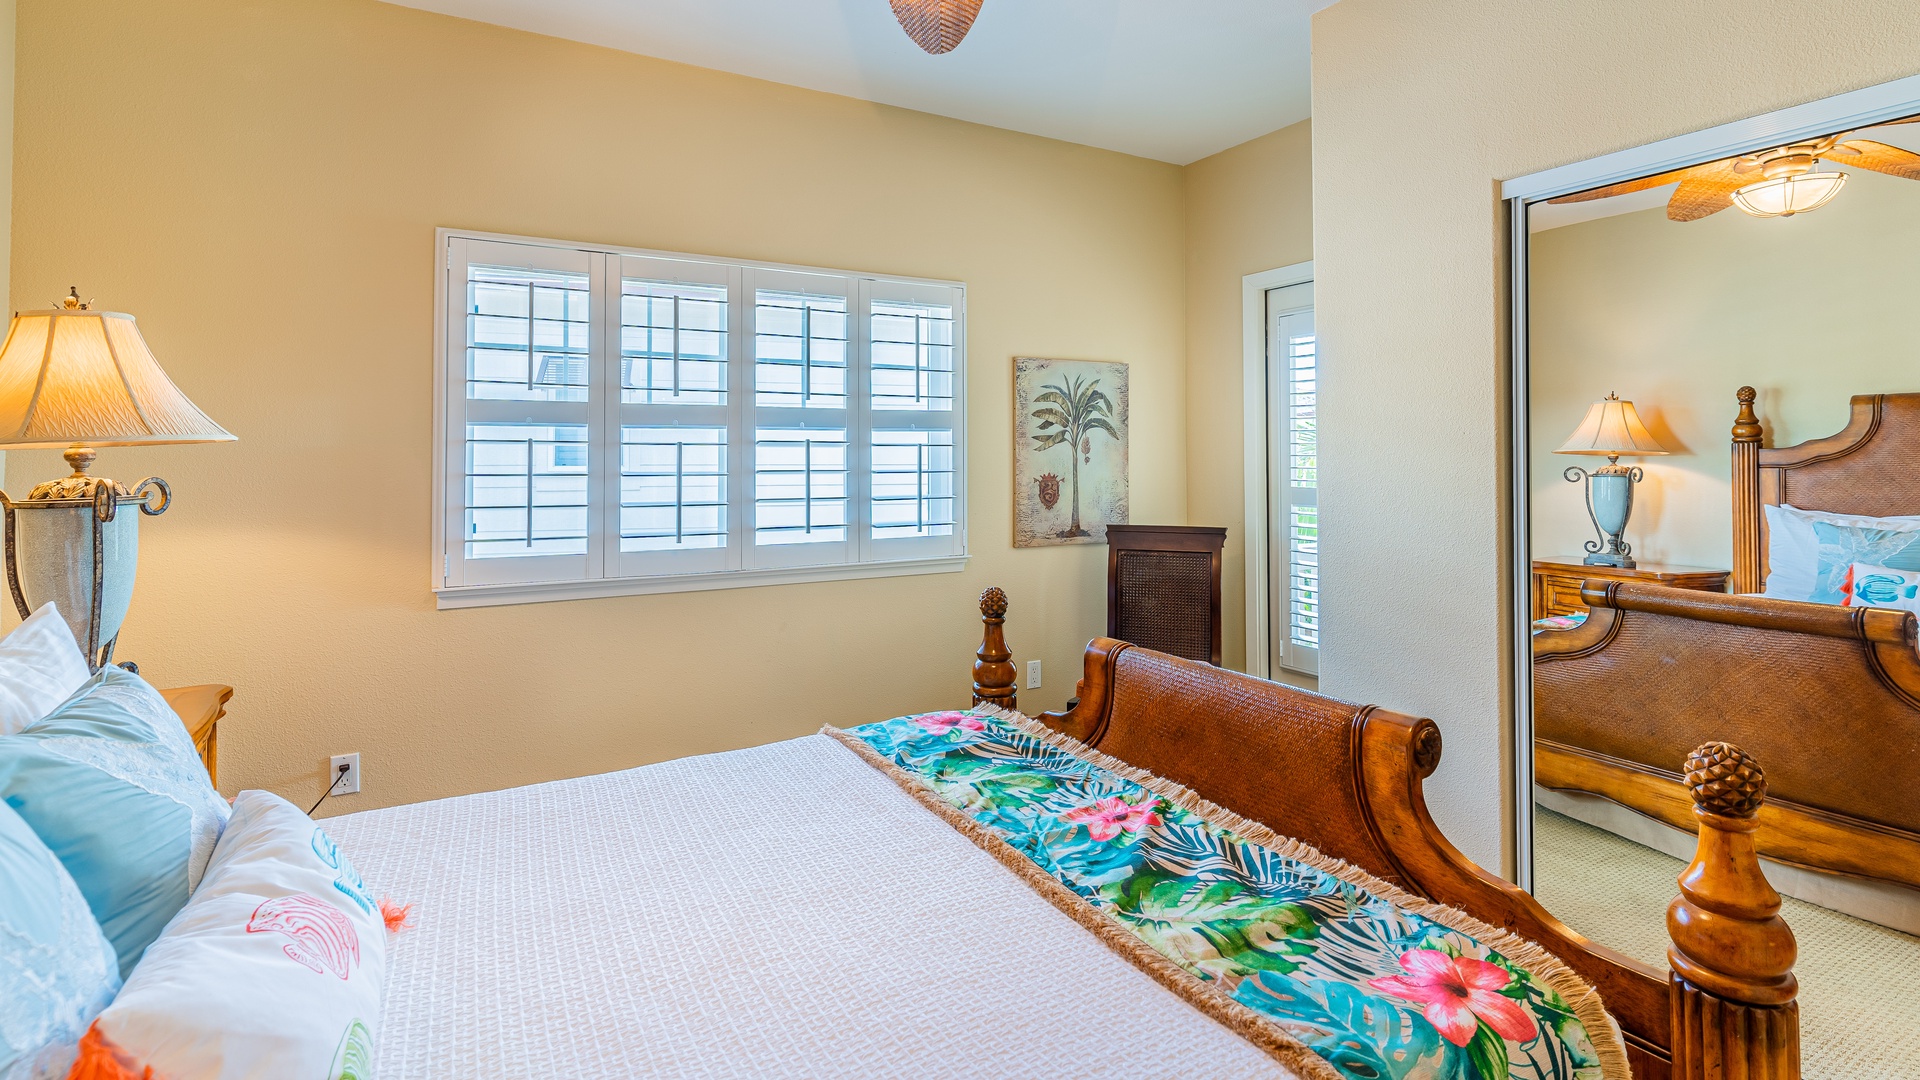 Kapolei Vacation Rentals, Coconut Plantation 1174-2 - The second guest bedroom with a closet and lanai access.